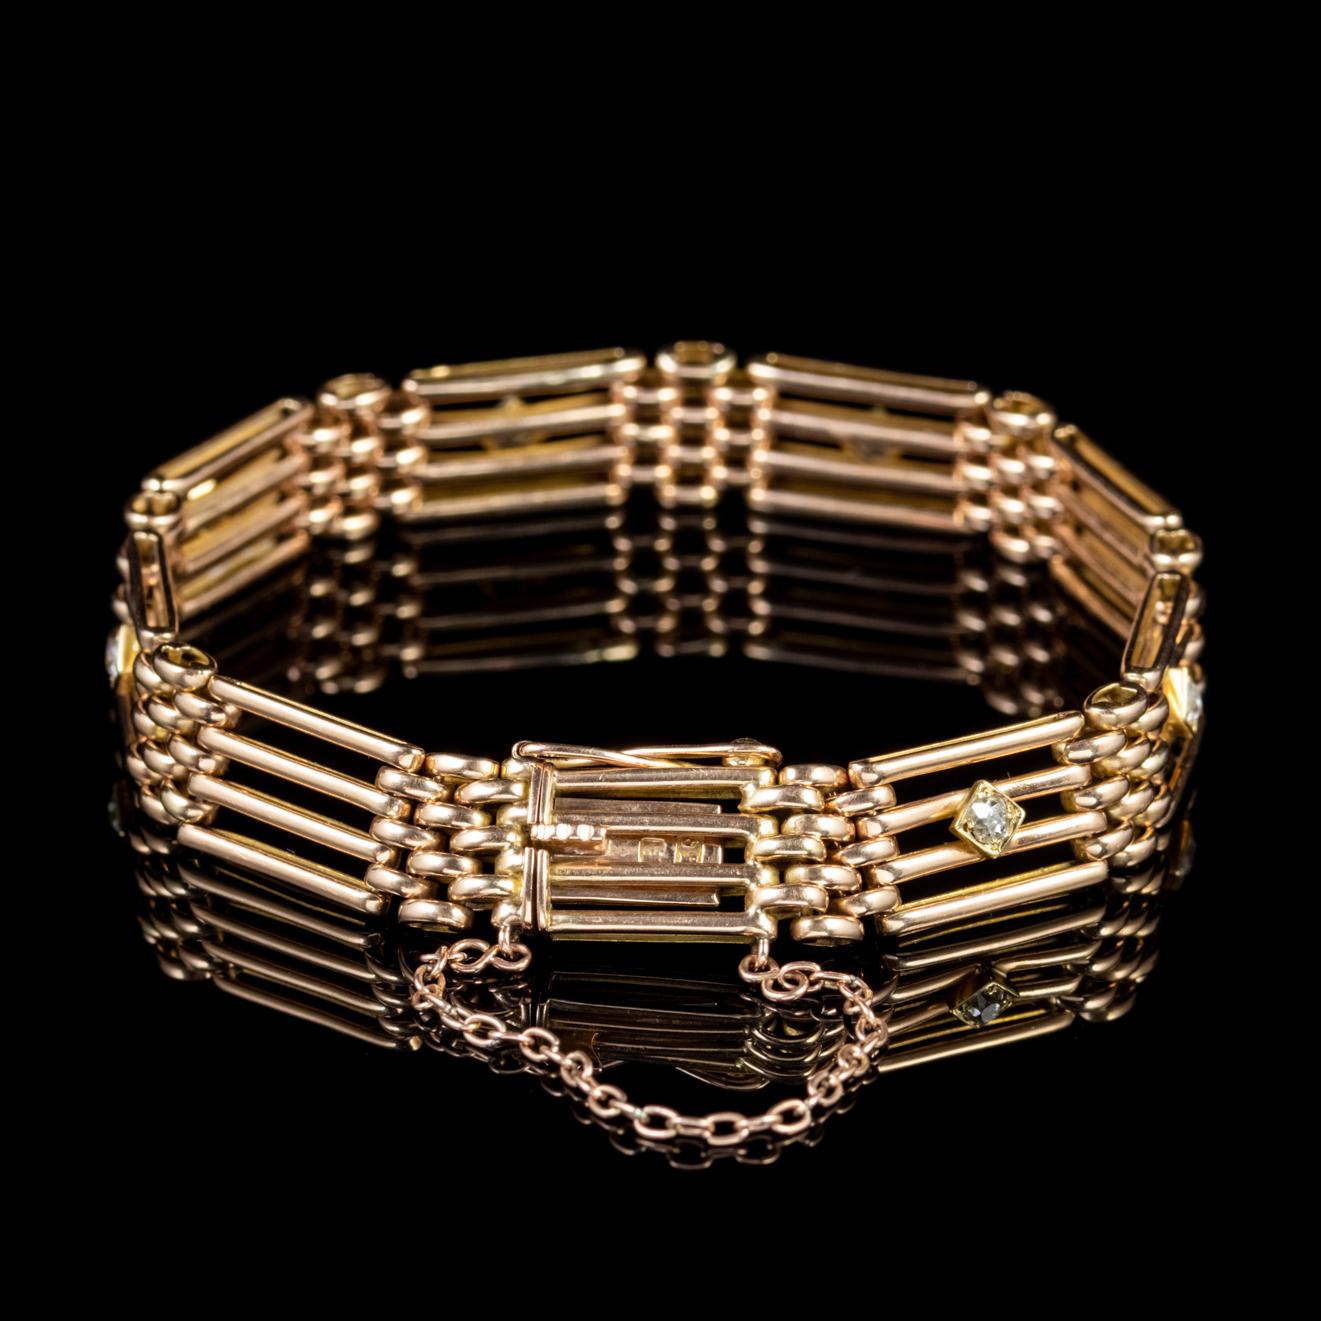 A spectacular antique Victorian gate bracelet made up of fabulous gate links dotted with seven 0.08ct Diamonds around the outer circumference. 

The piece is modelled in 15ct Yellow Gold and displays beautiful workmanship all round. It also features